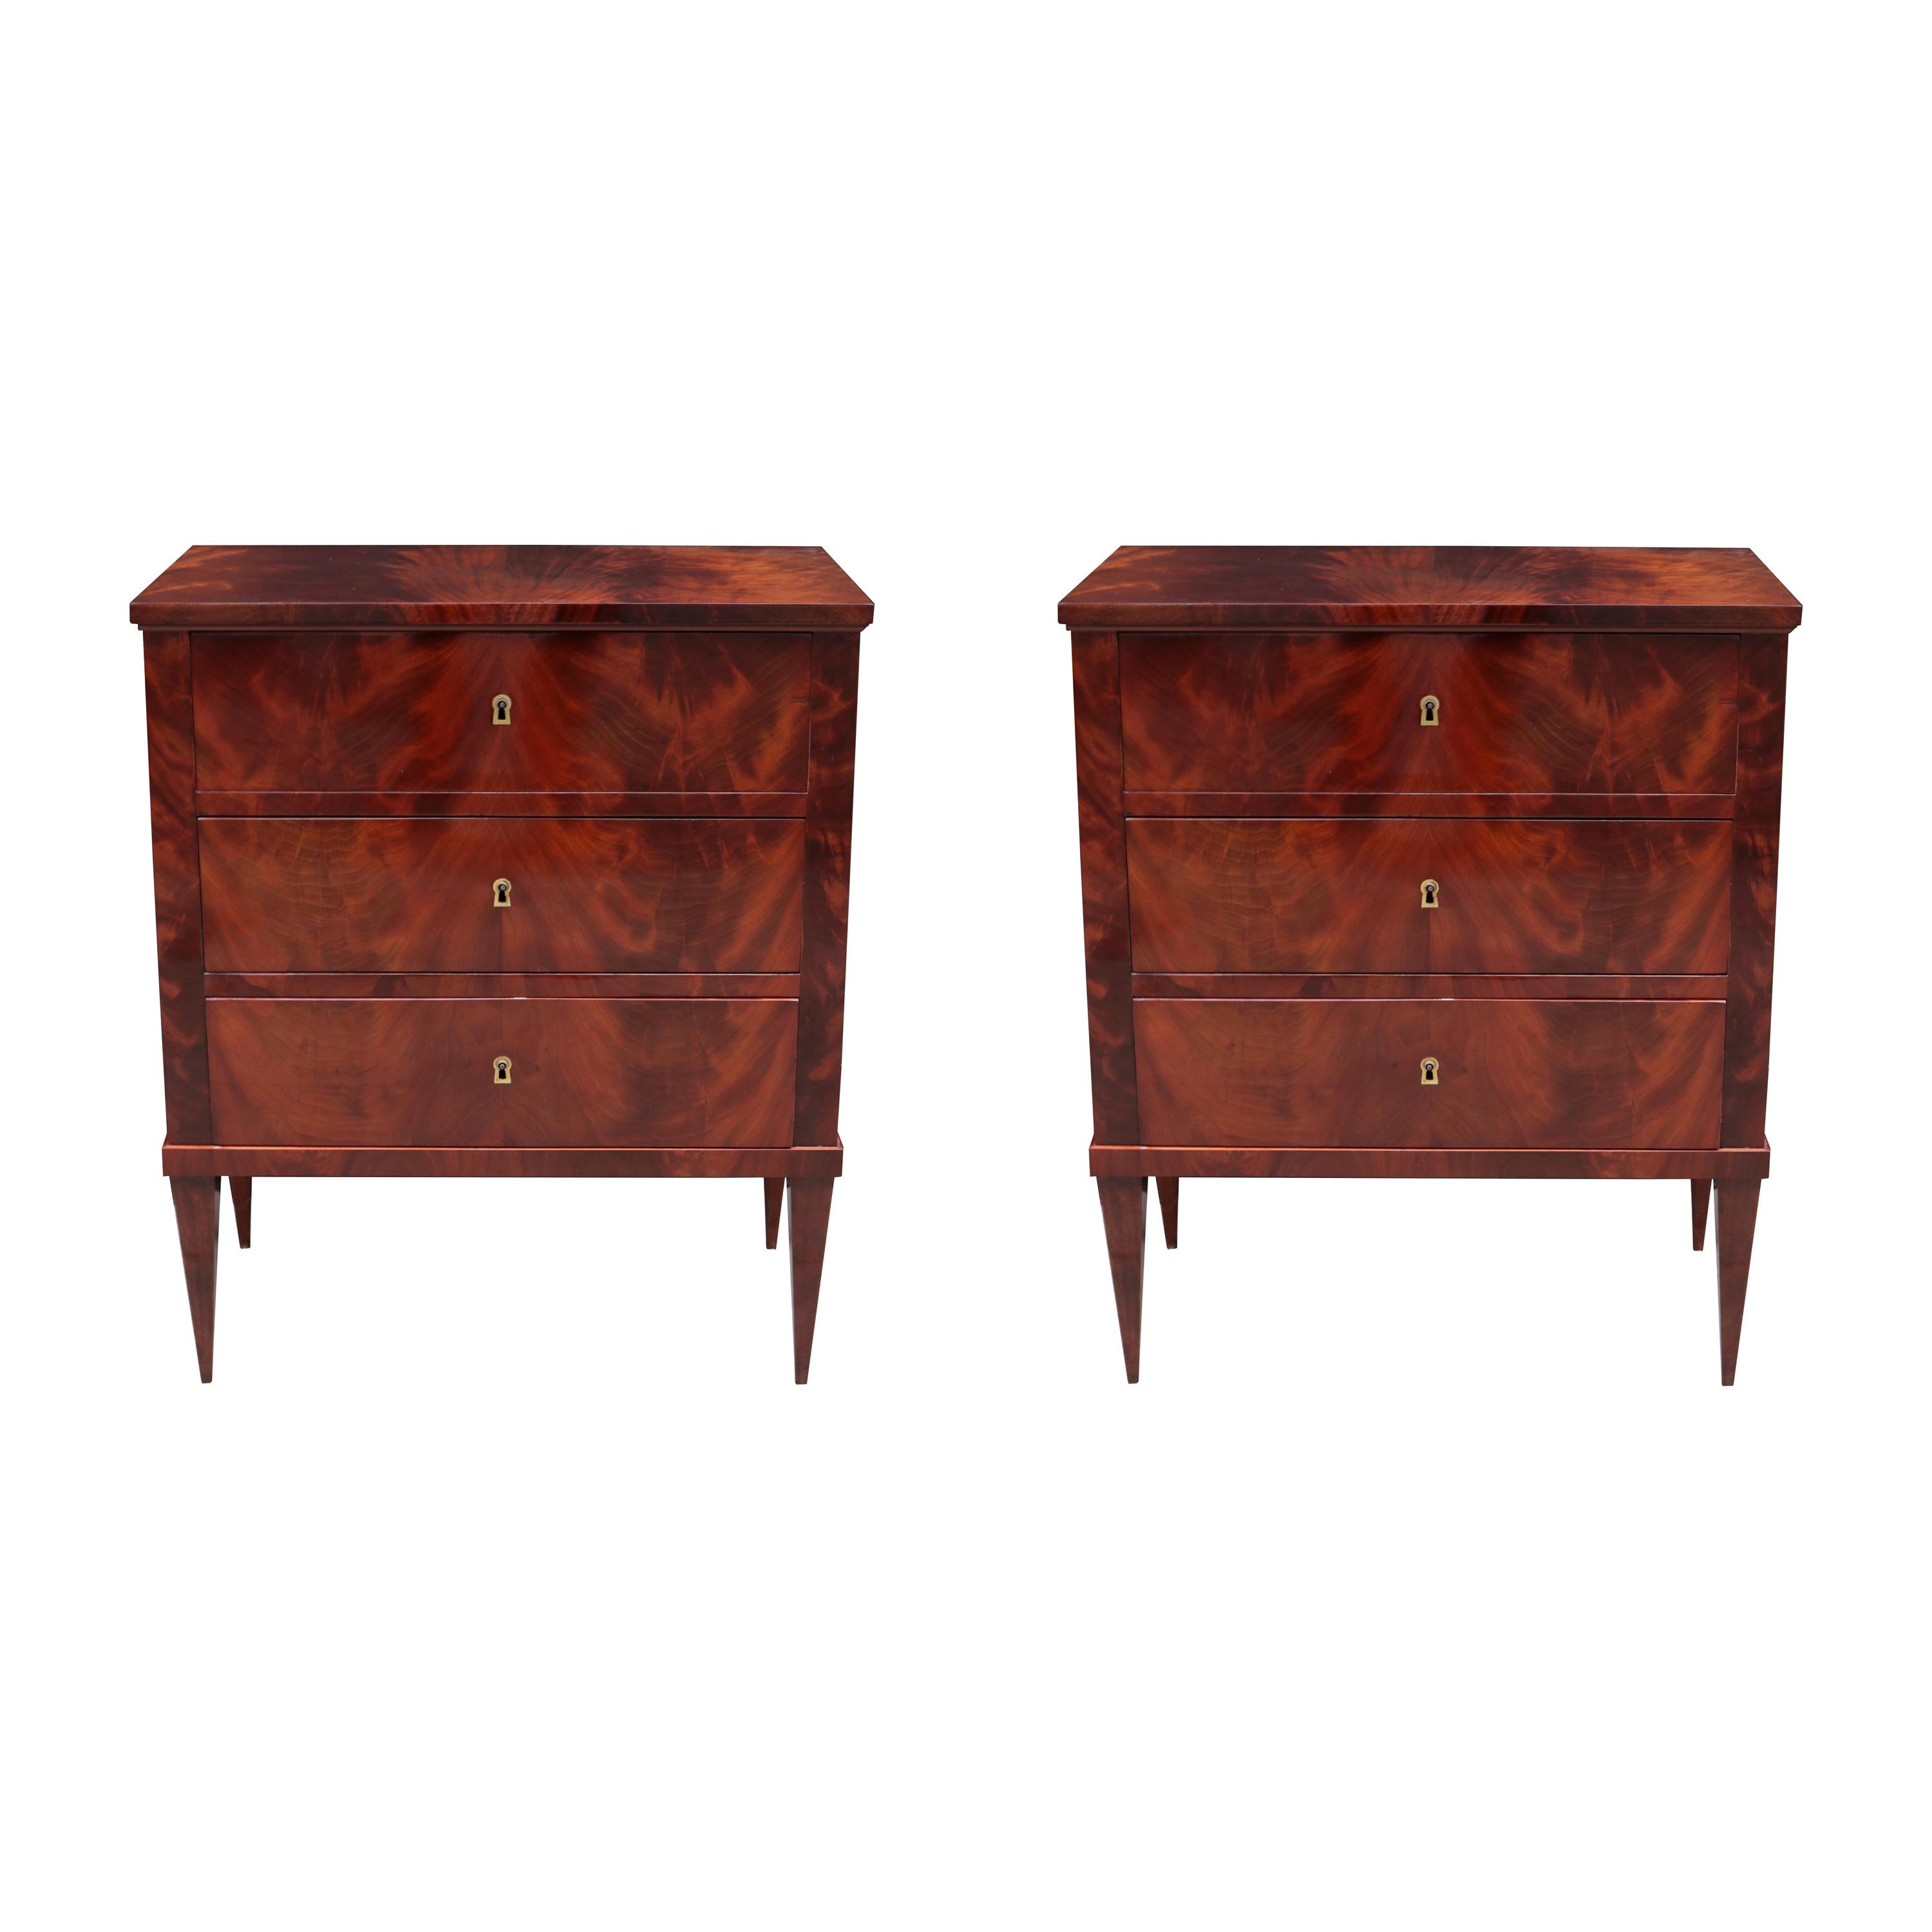 Pair of Italian Neoclassical Bedside Chests